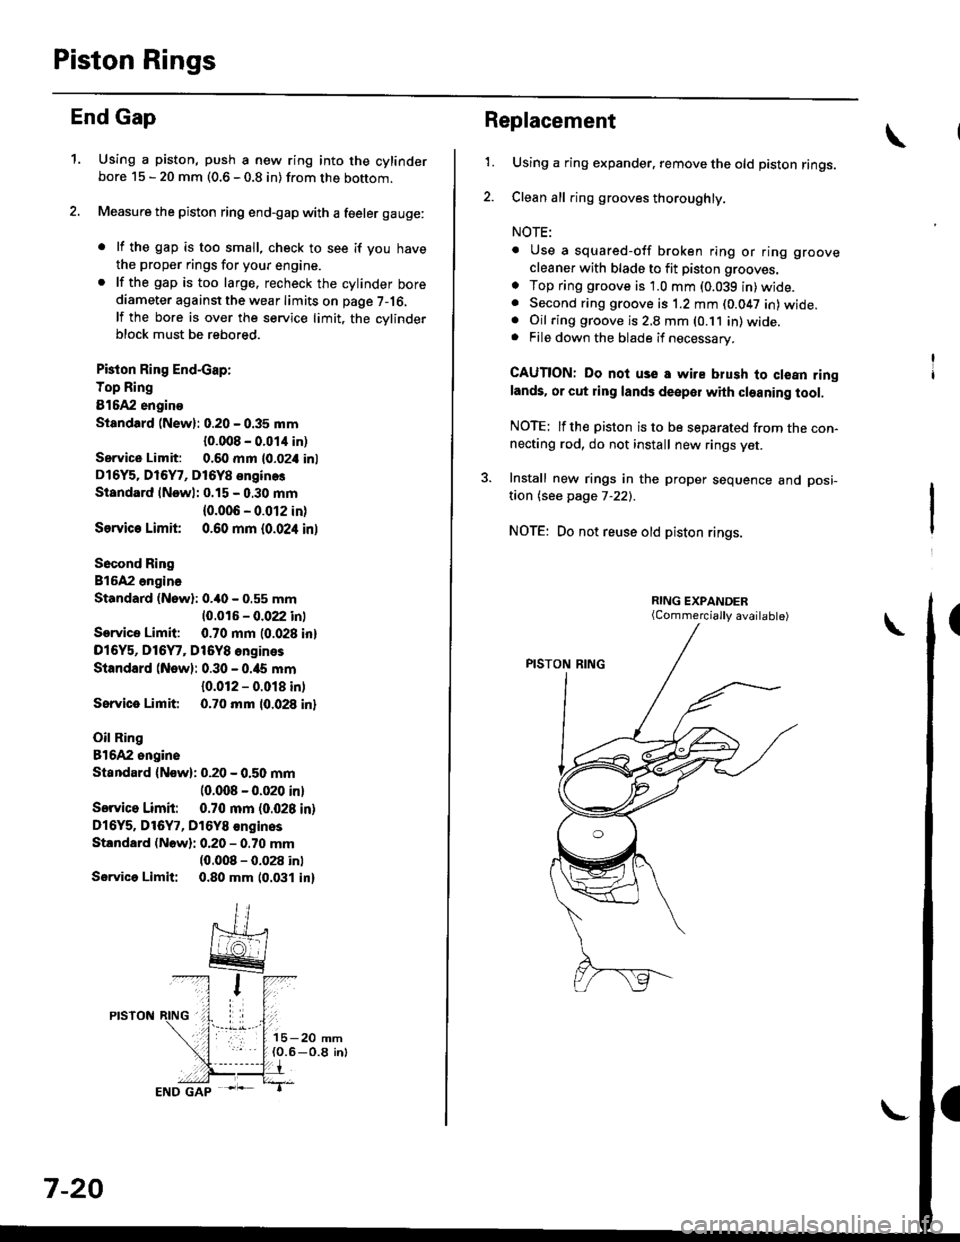 HONDA CIVIC 2000 6.G Repair Manual Piston Rings
End Gap
1.Using a piston, push a new ring into the cylinderbore 15 - 20 mm (0.6 - 0.8 in) from the bottom.
Measure the piston ring end-gap with a feeler gauge:
. lf the gap is too small, 